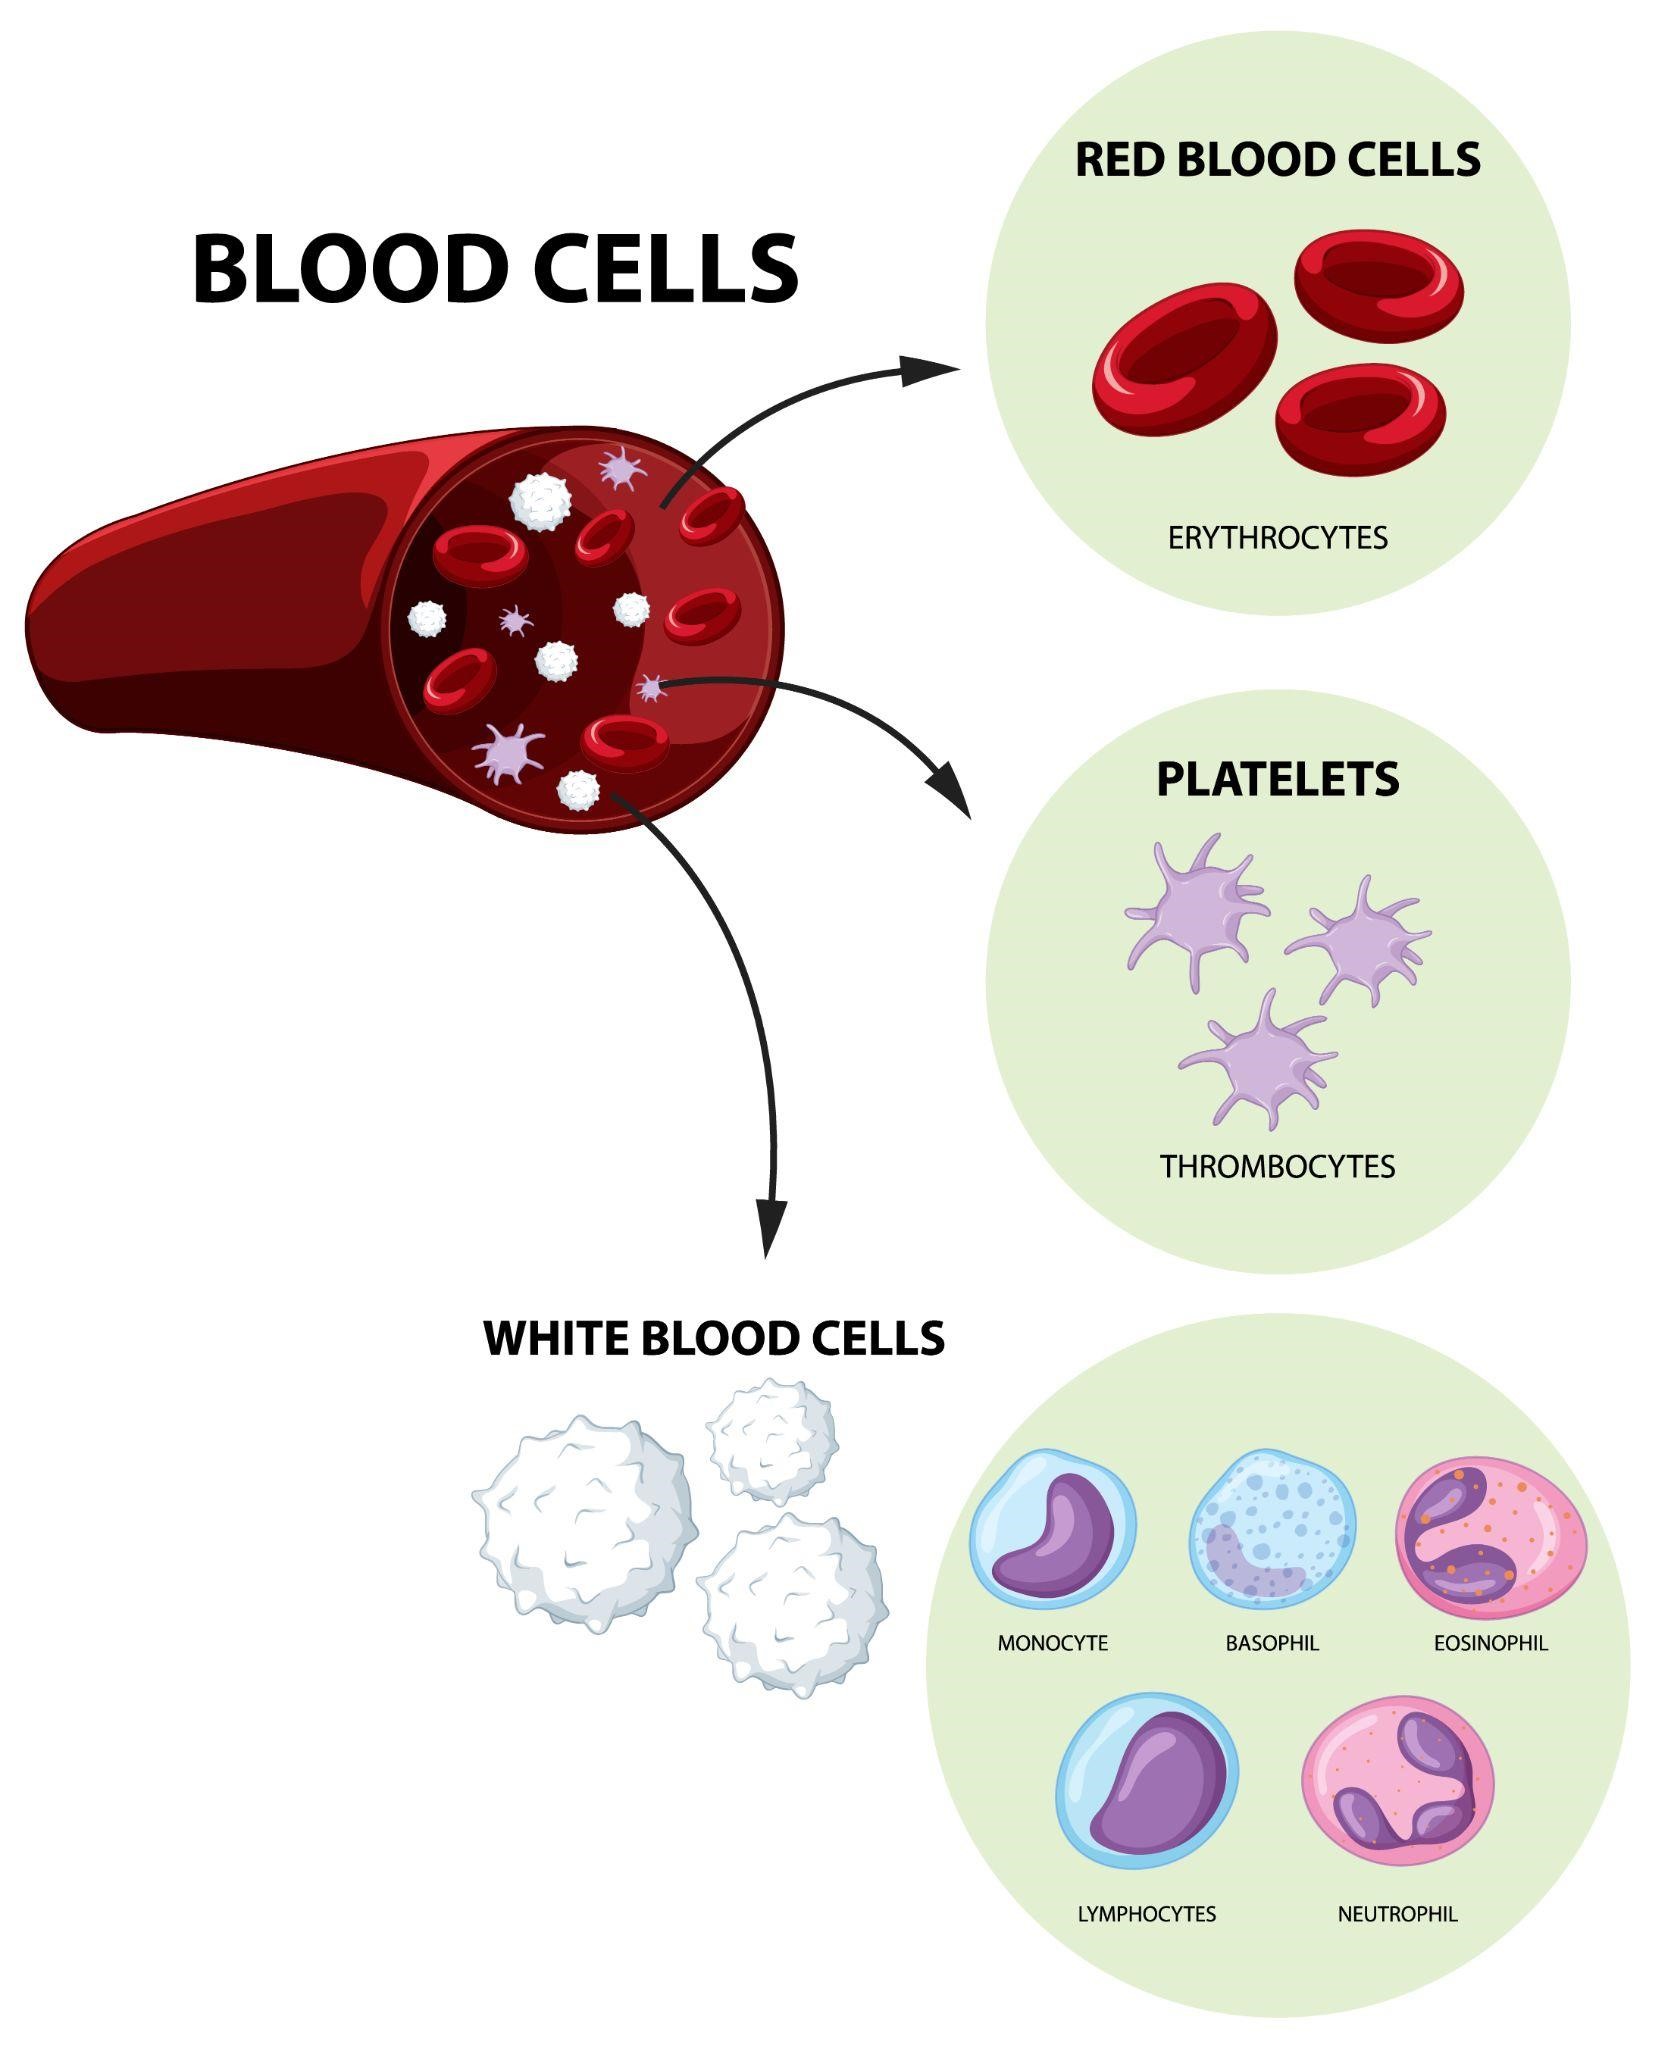 How to Increase Platelet Count